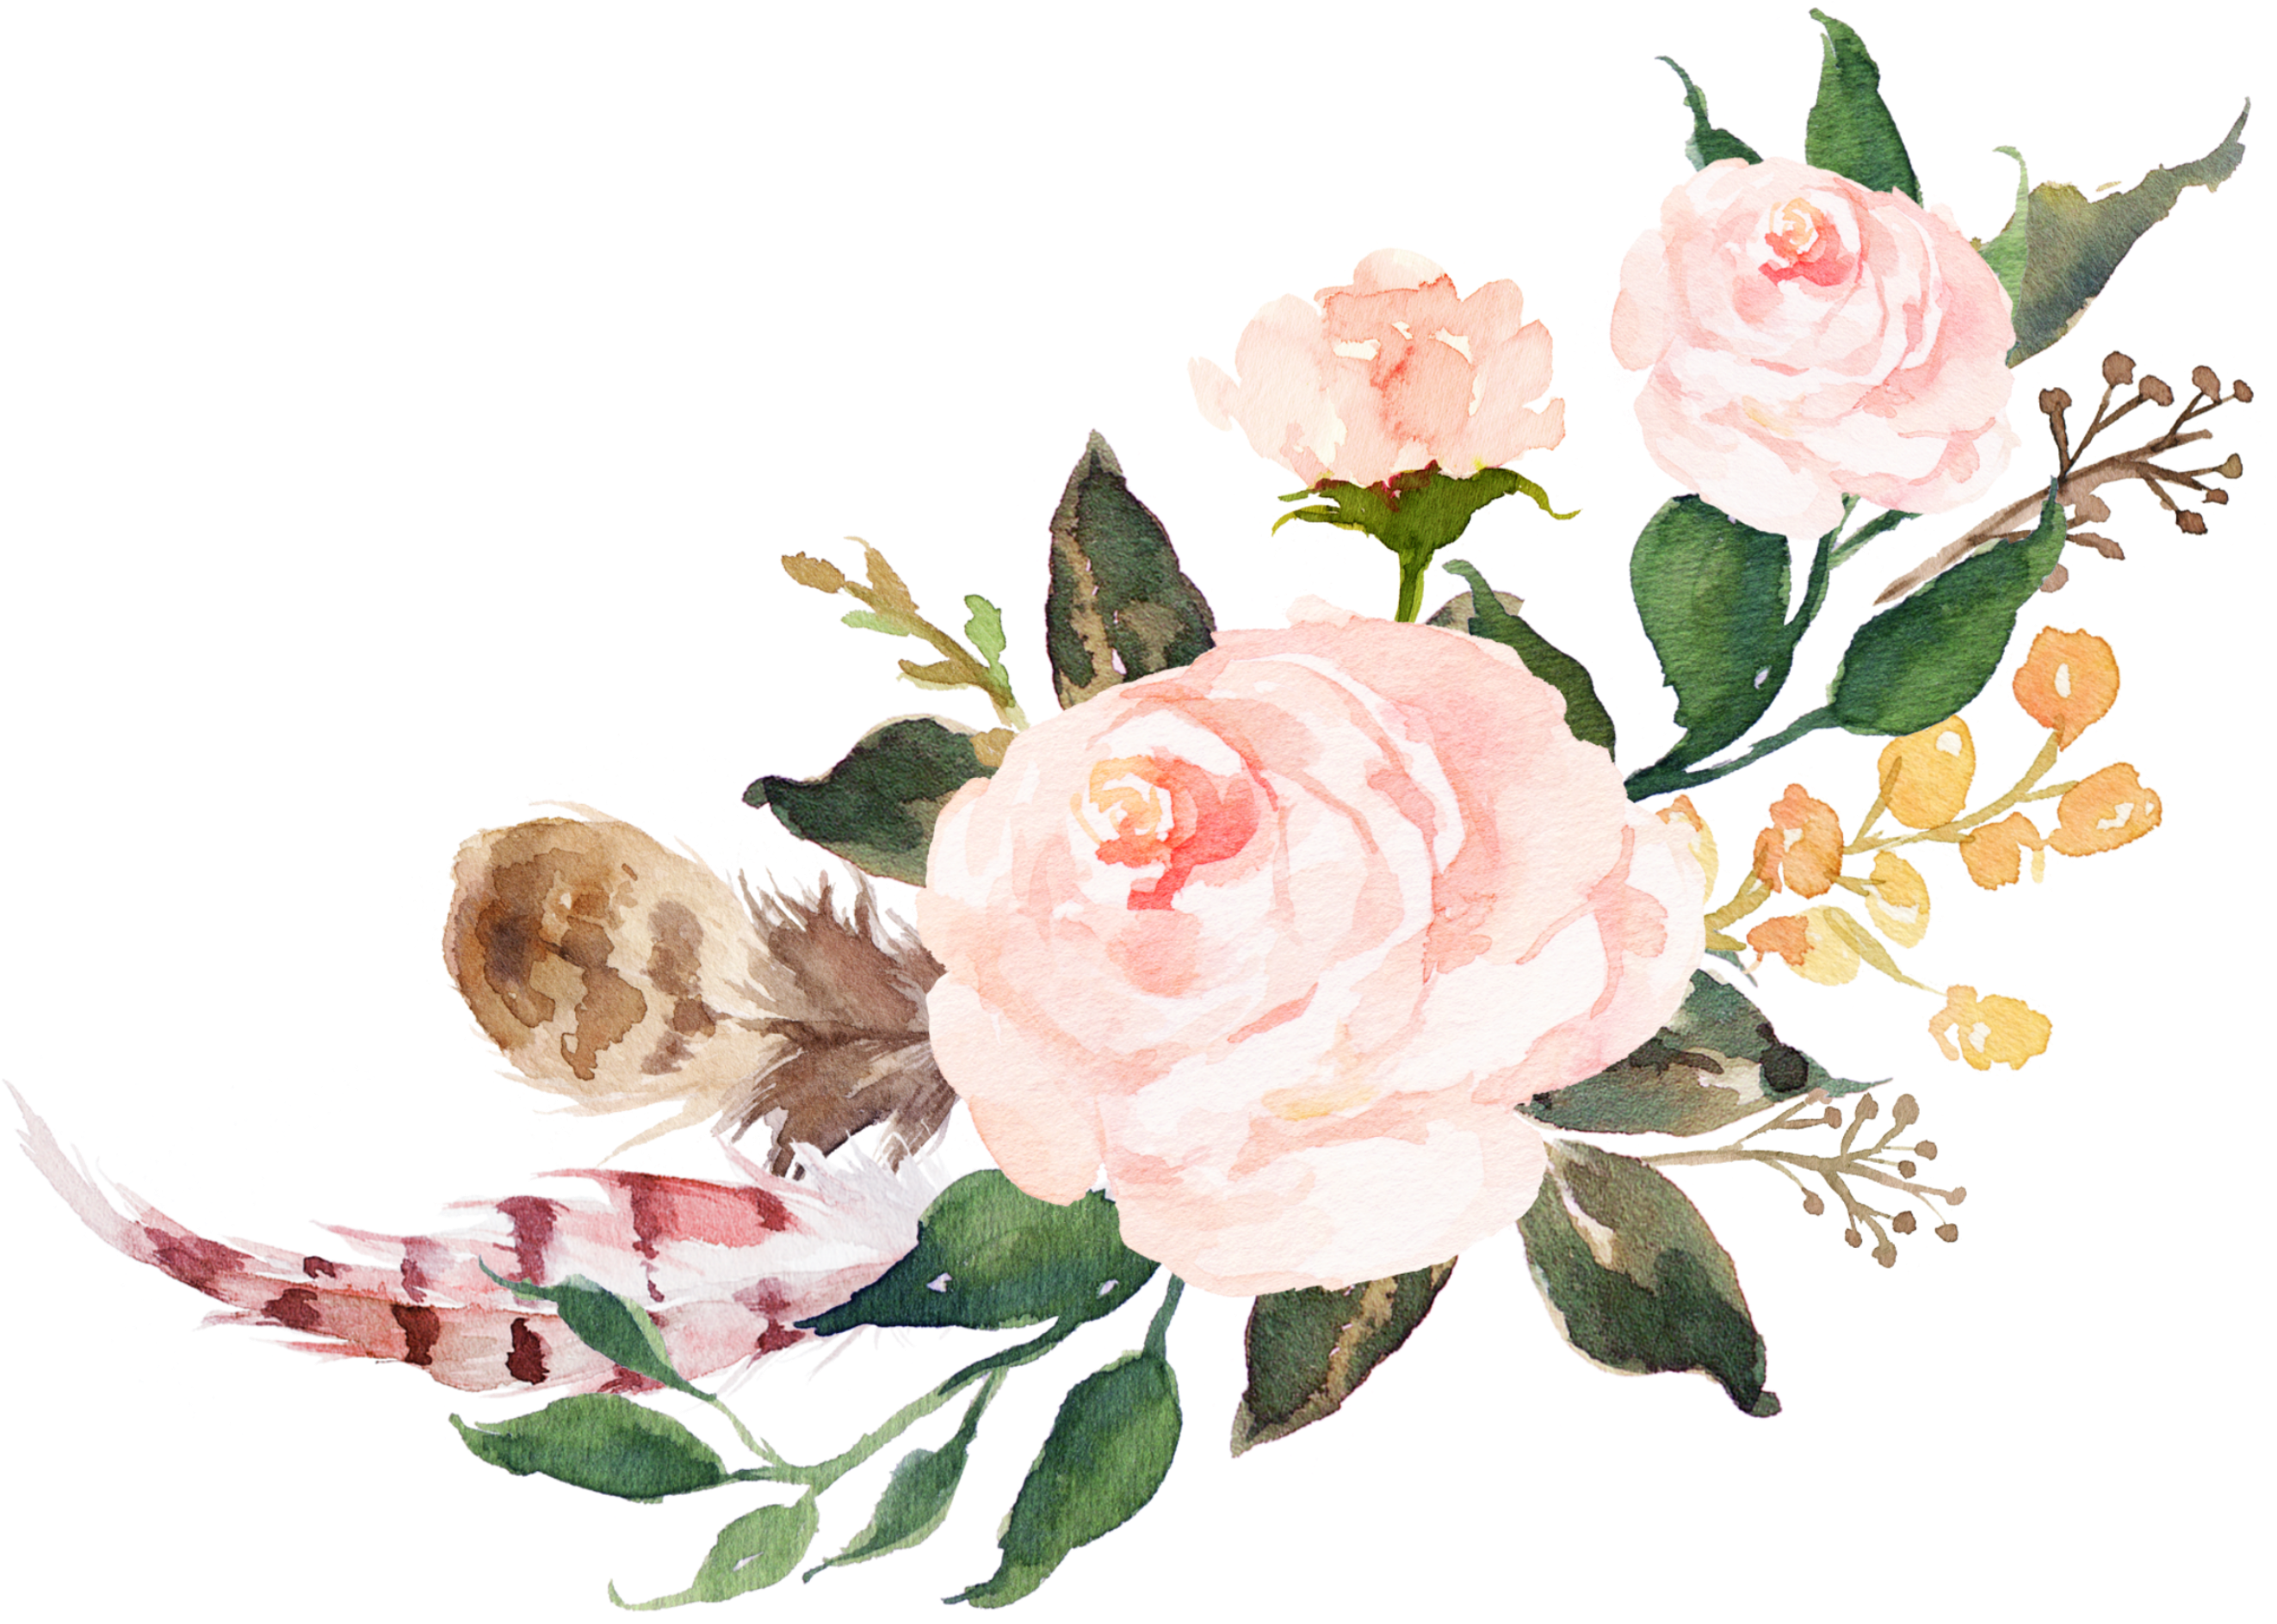 Aesthetic Flower PNG Free Image